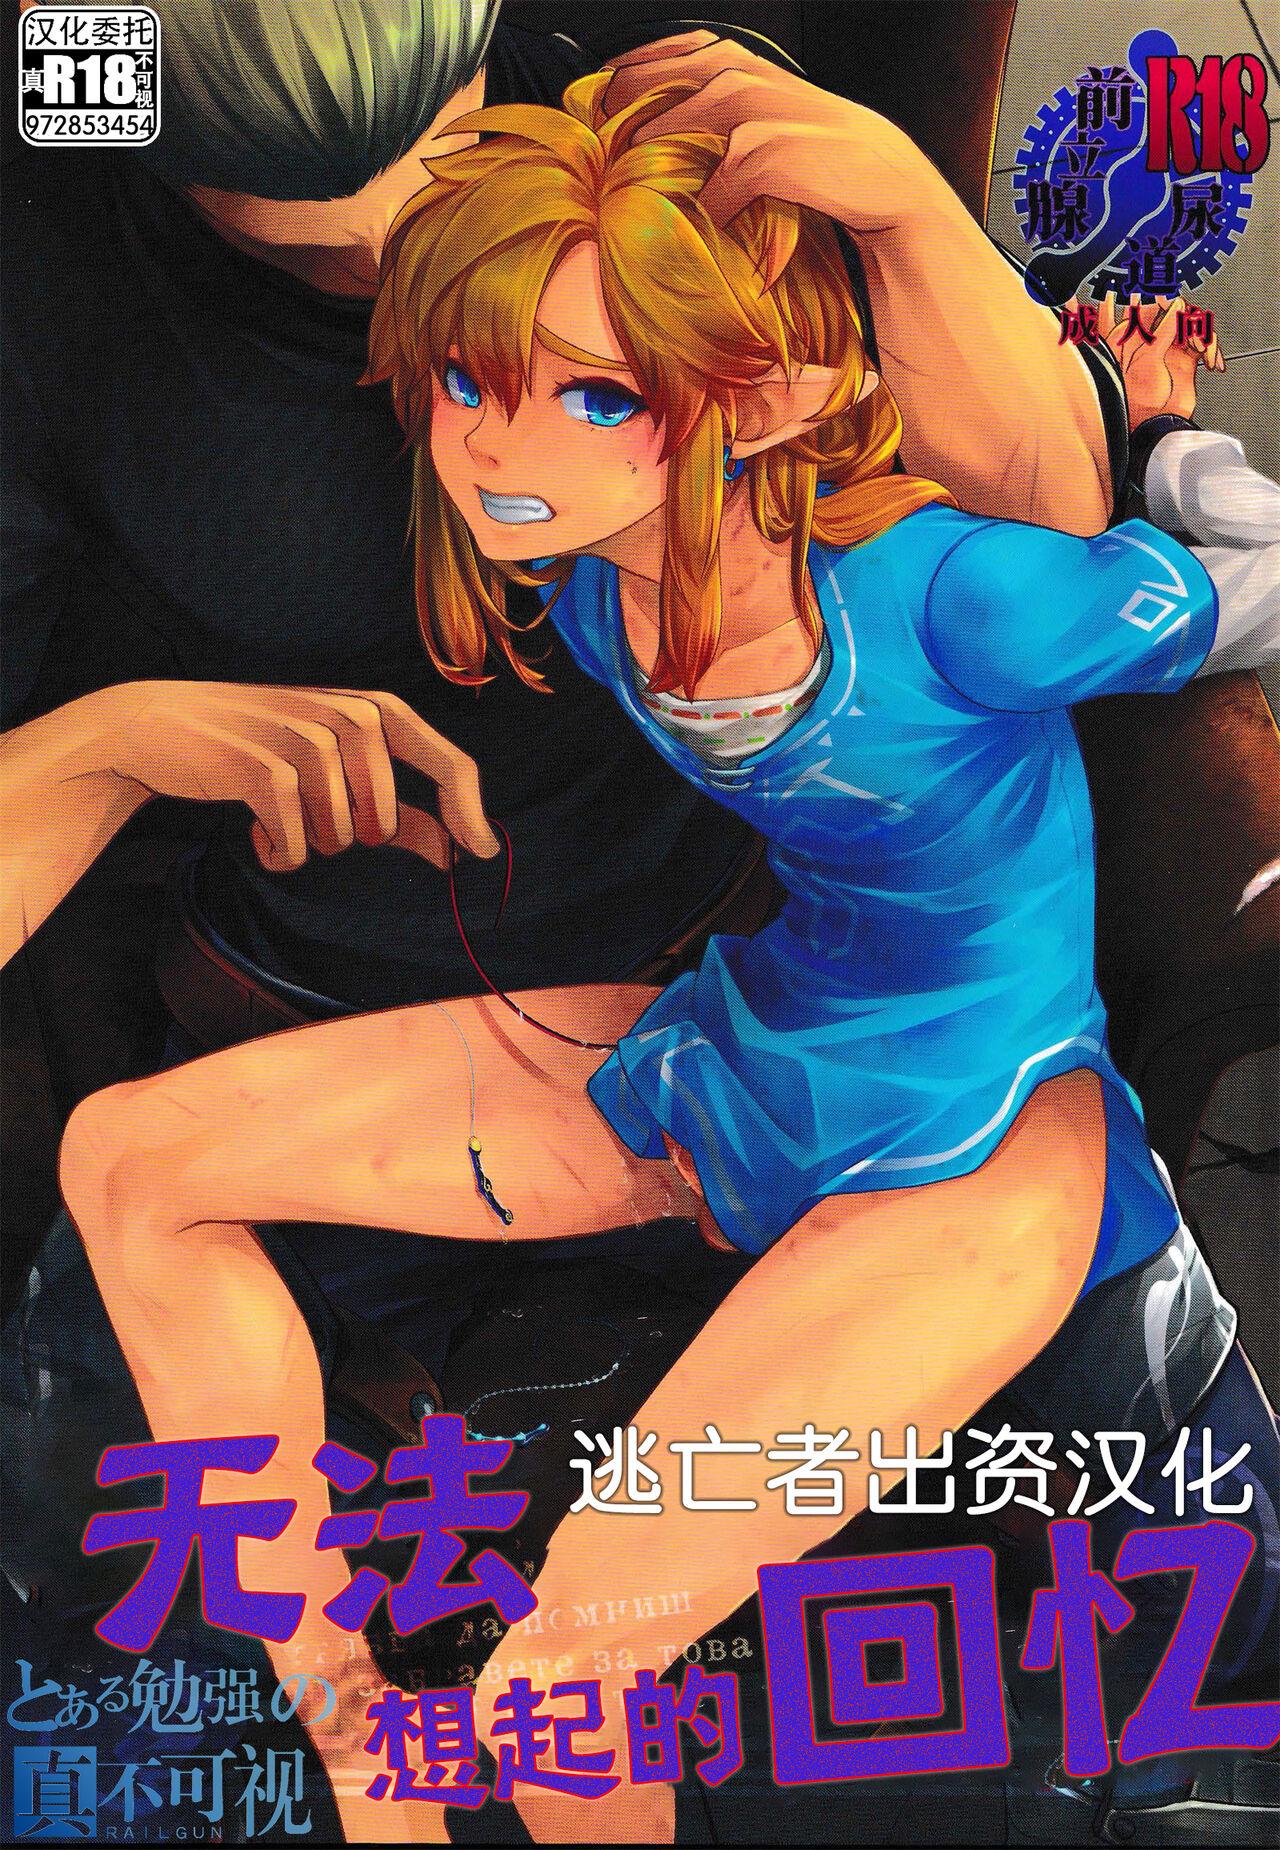 Sapphic Erotica 思い出してはいけない記憶 - The legend of zelda Gay Pawnshop - Picture 1